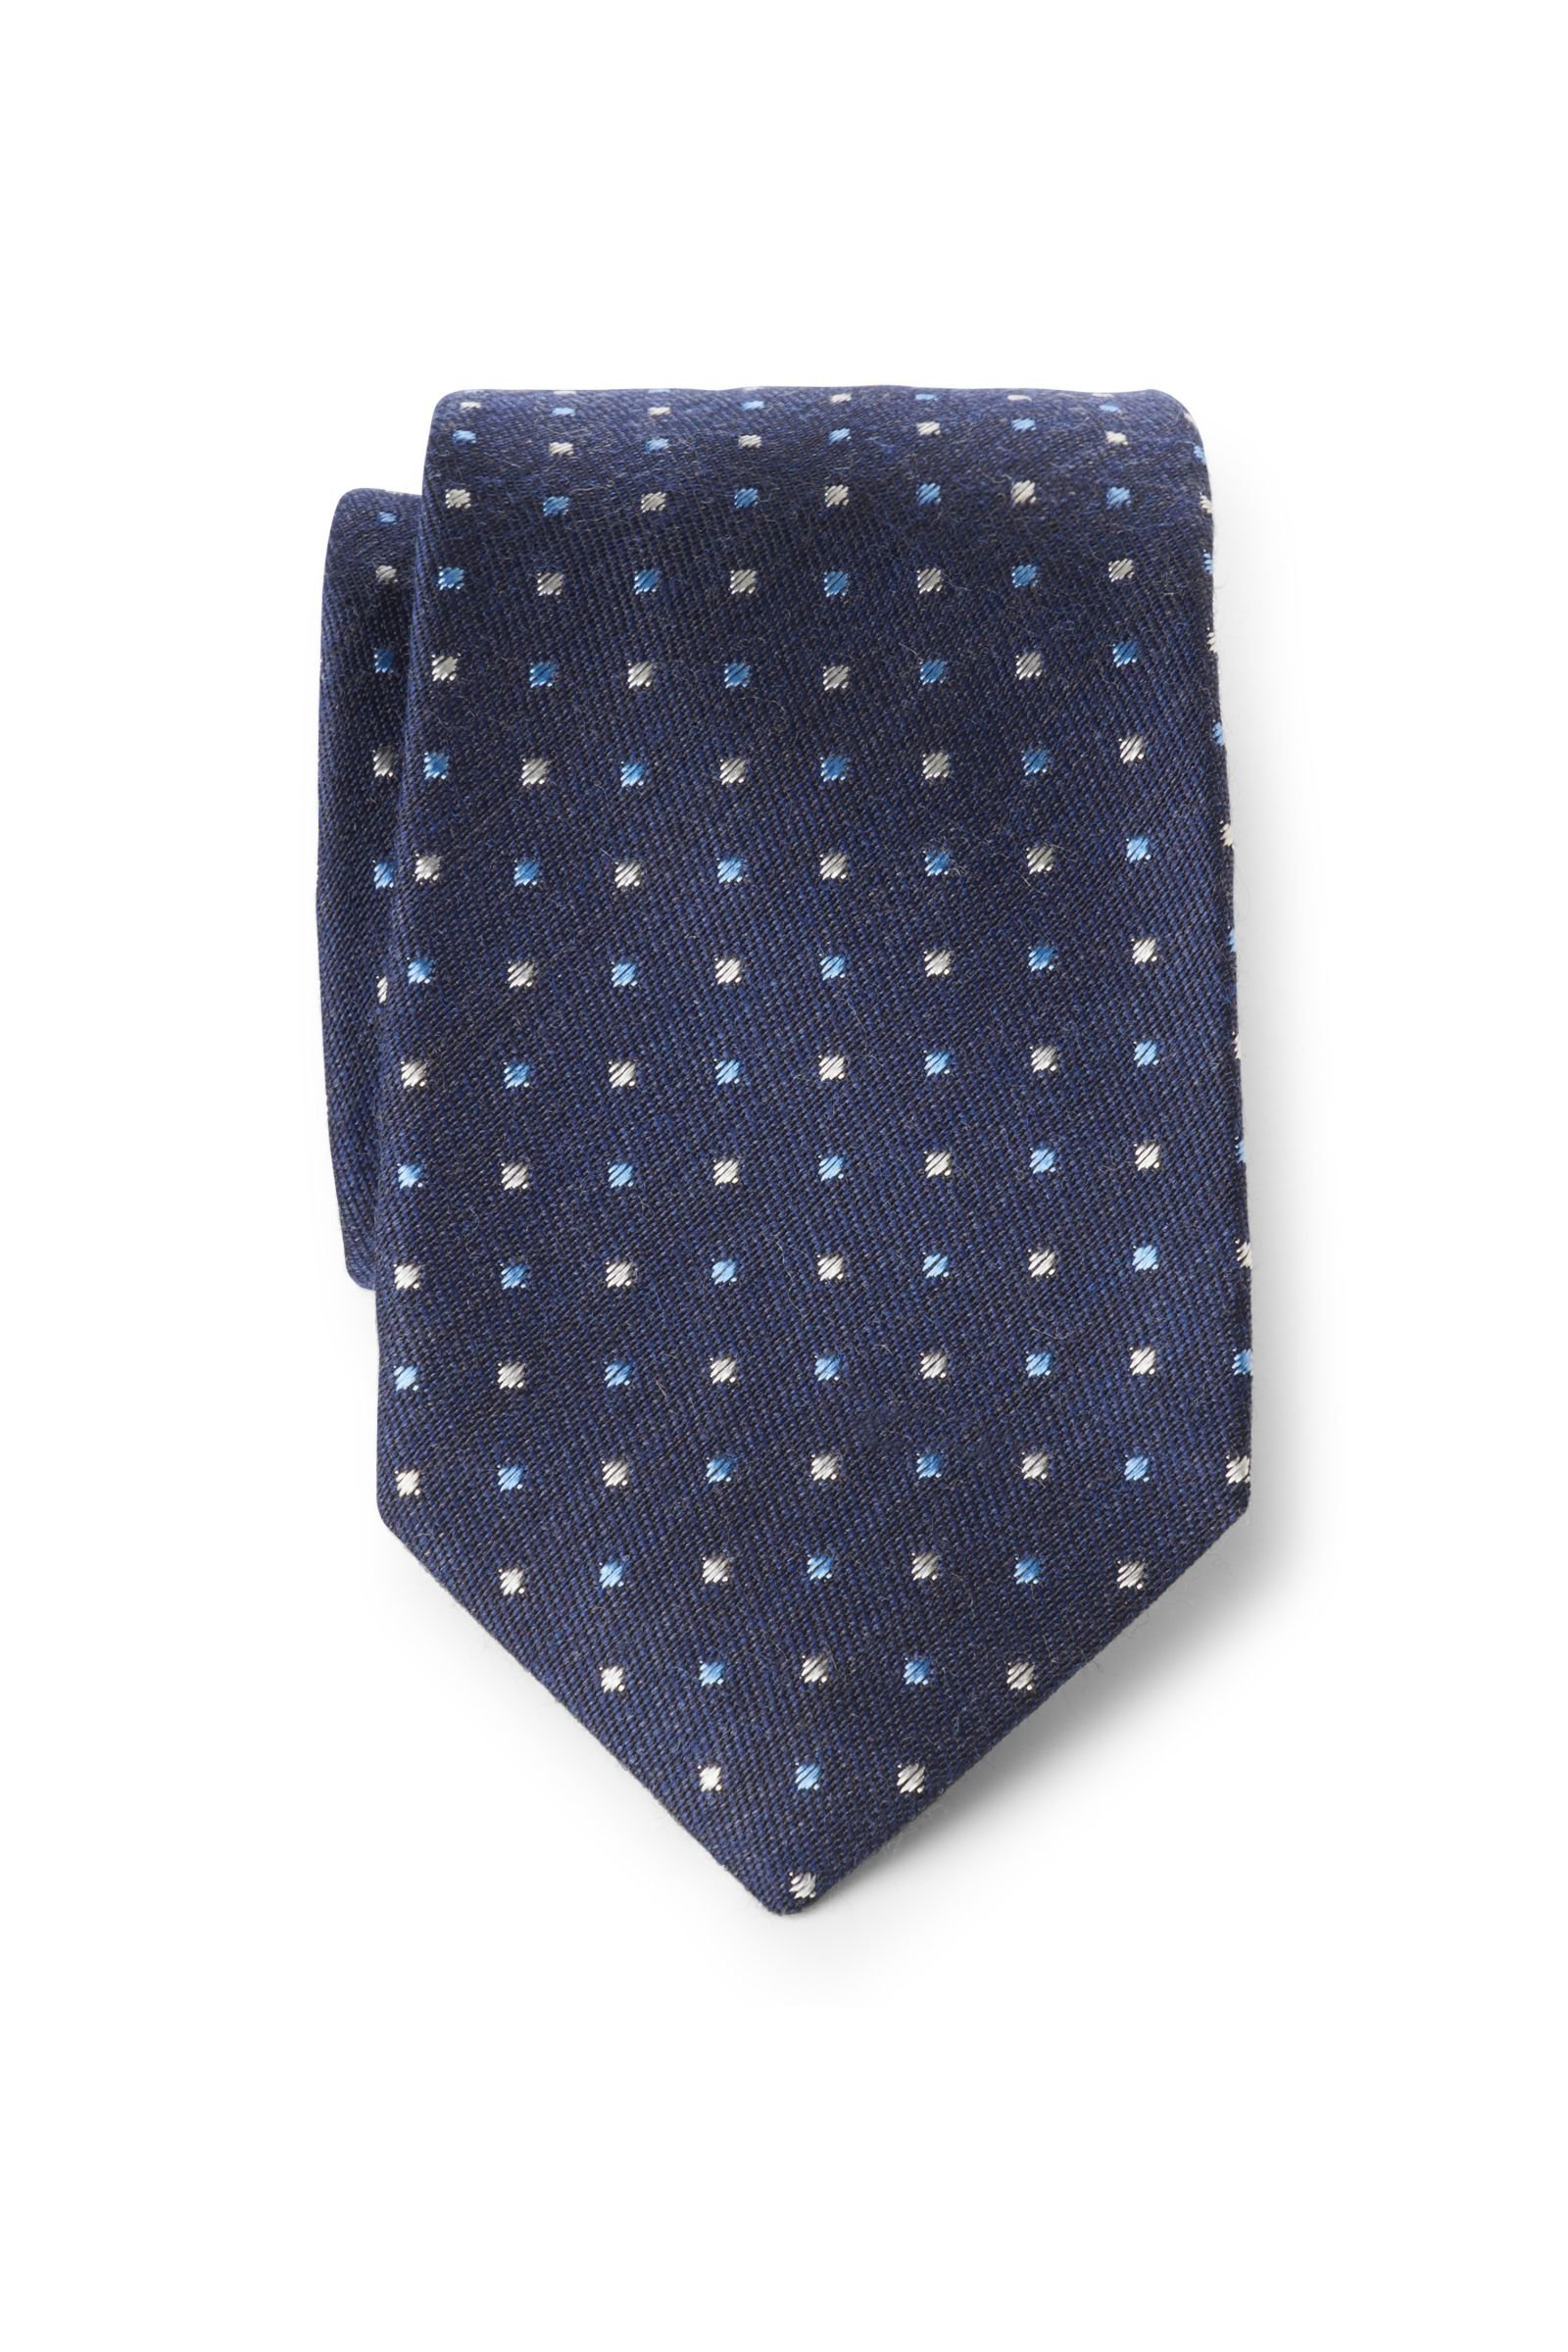 Tie navy patterned